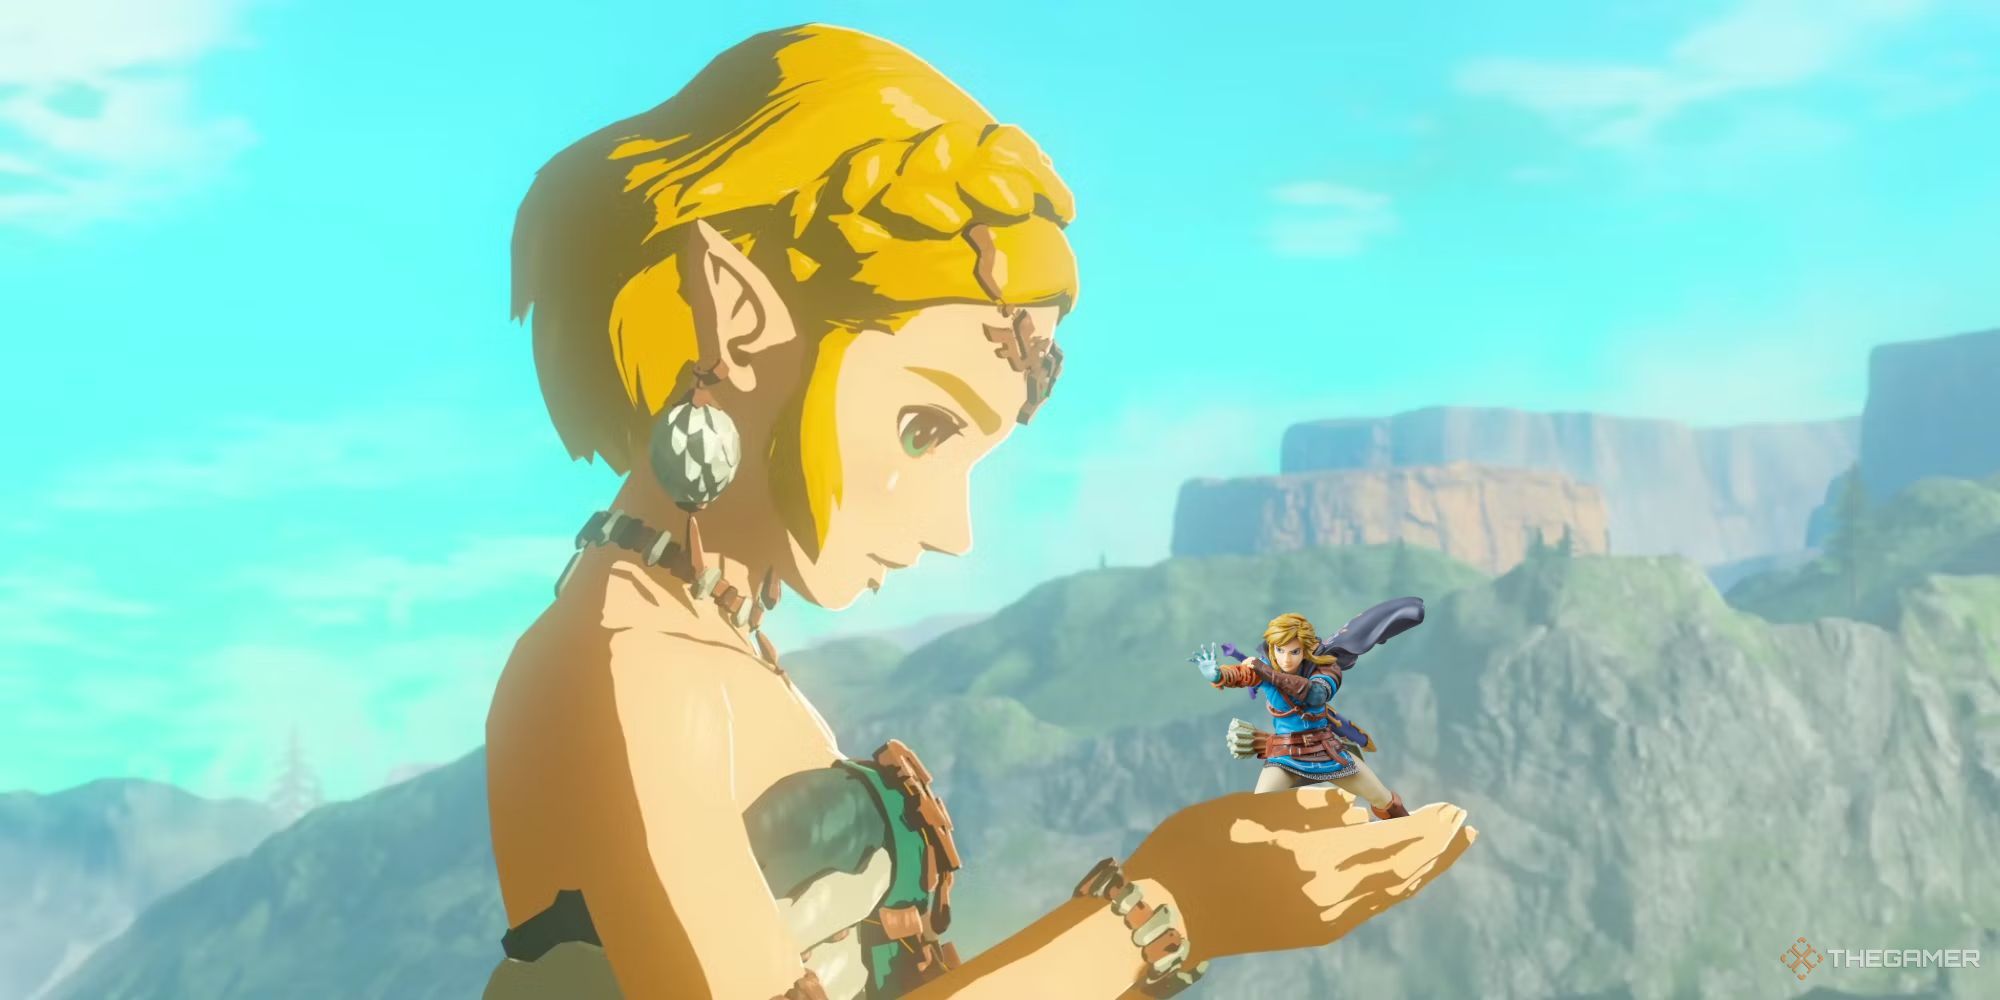 Photoshopped image of Zelda holding a Link Amiibo in Tears of the Kingdom